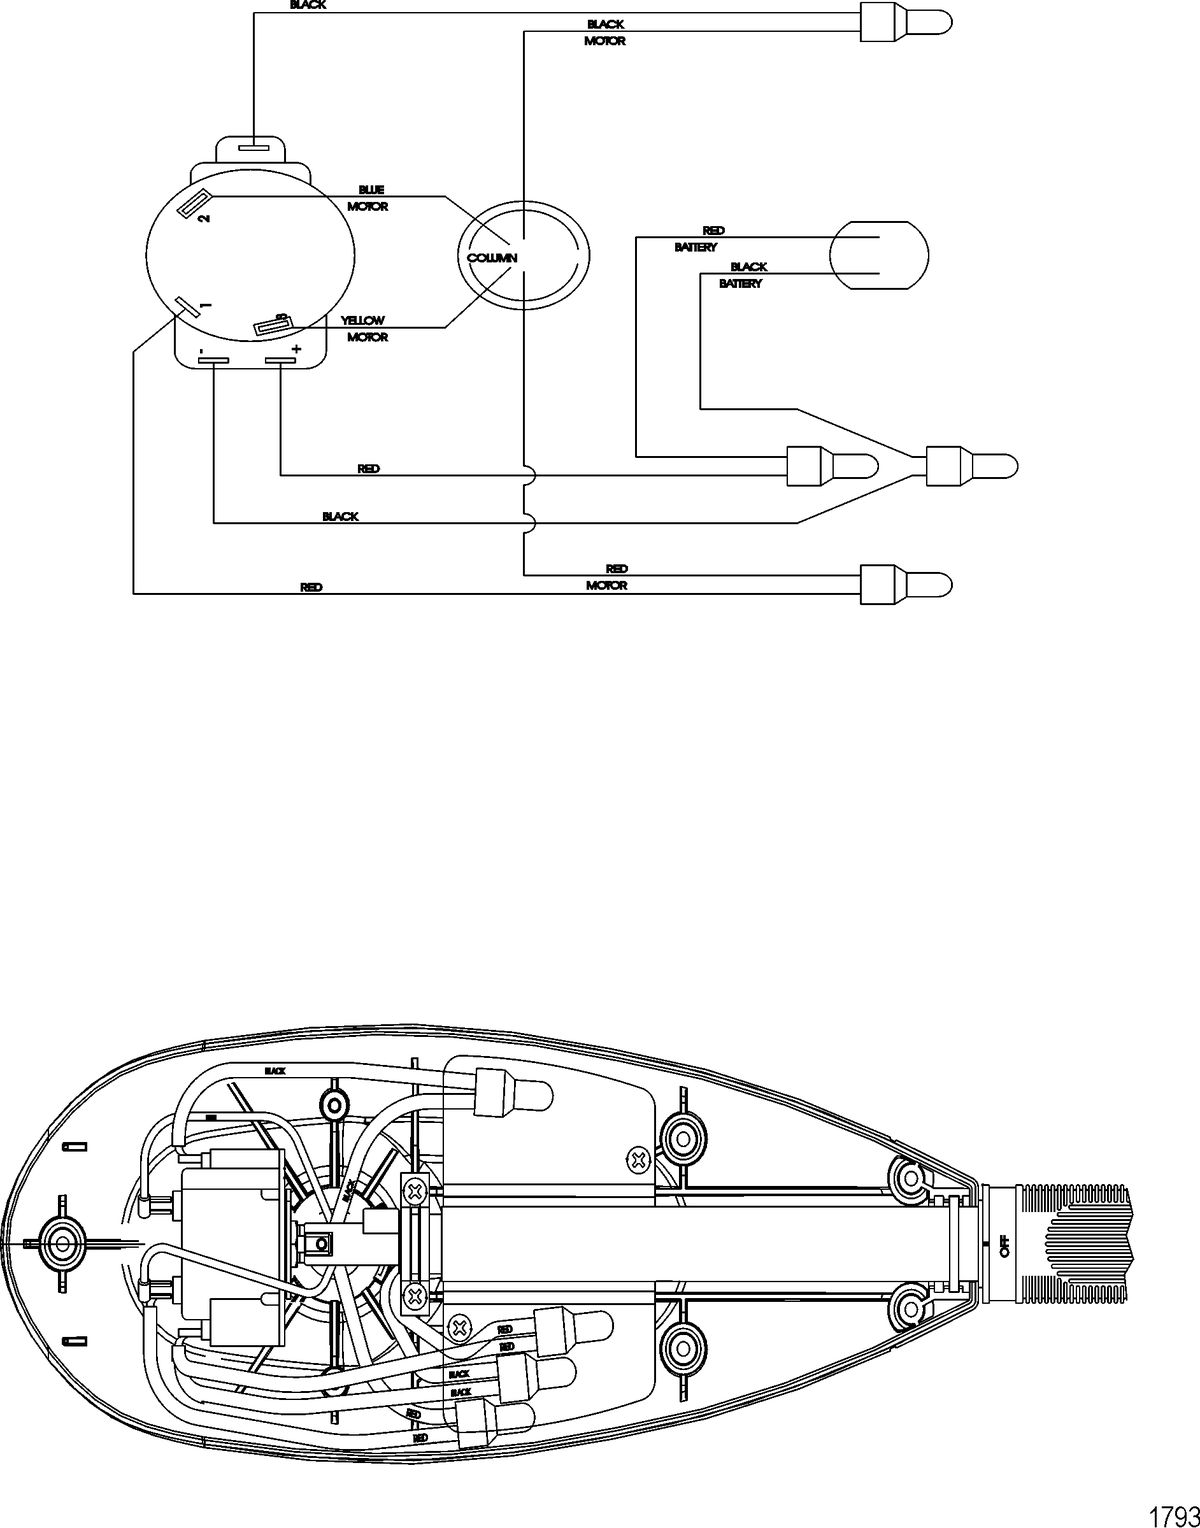 TROLLING MOTOR MOTORGUIDE FRESH WATER SERIES Wire Diagram(Model FW46HT) (Without Quick Connect)